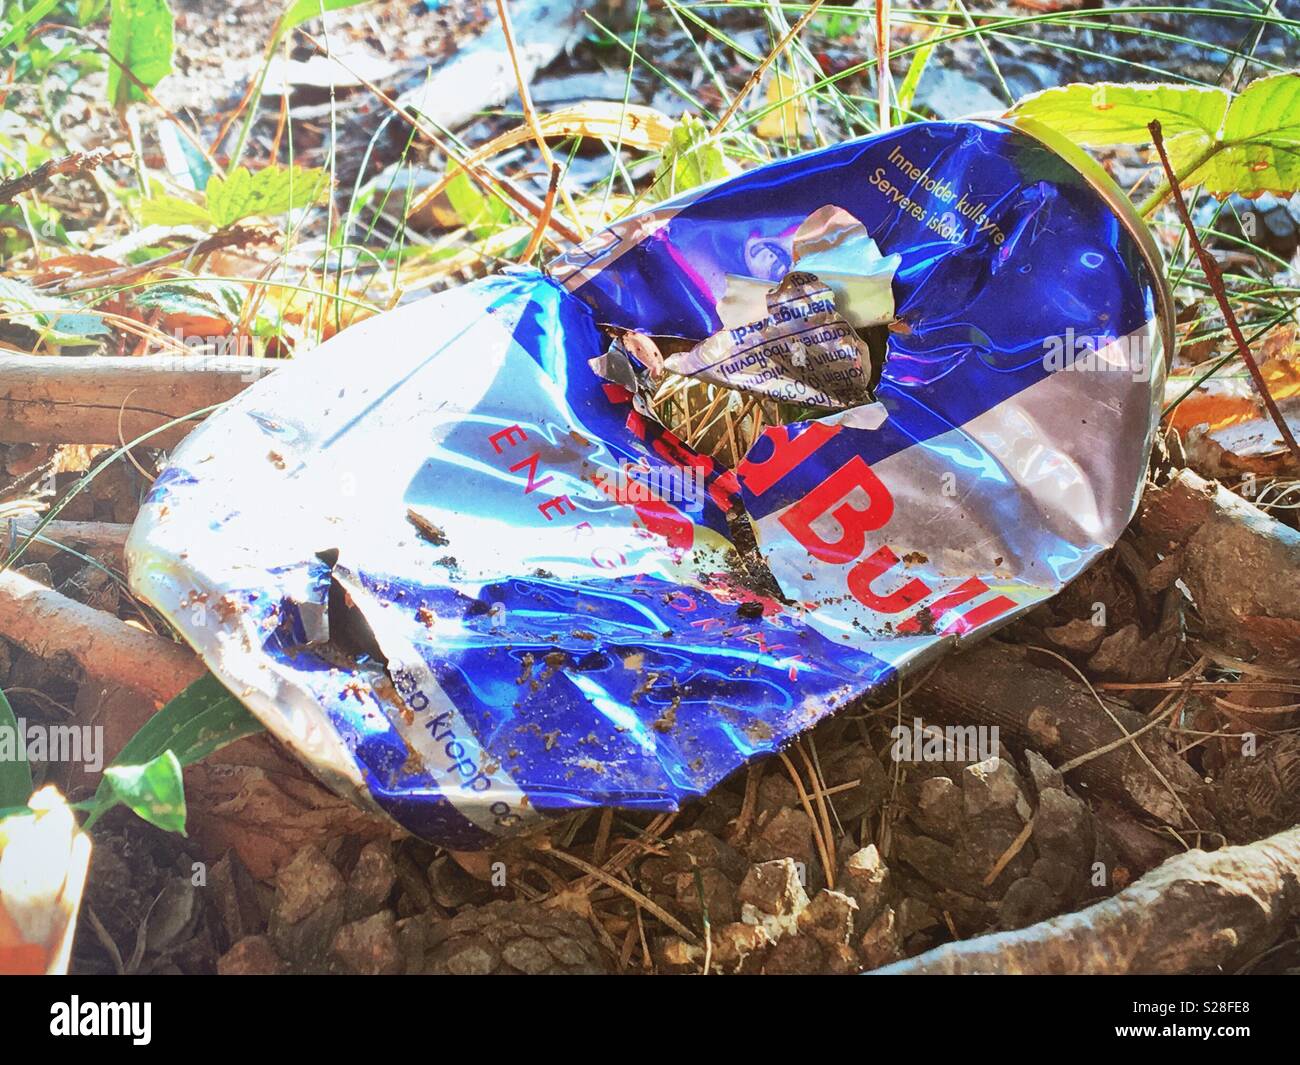 Discarded litter in nature, Red Bull aluminum can. Stock Photo